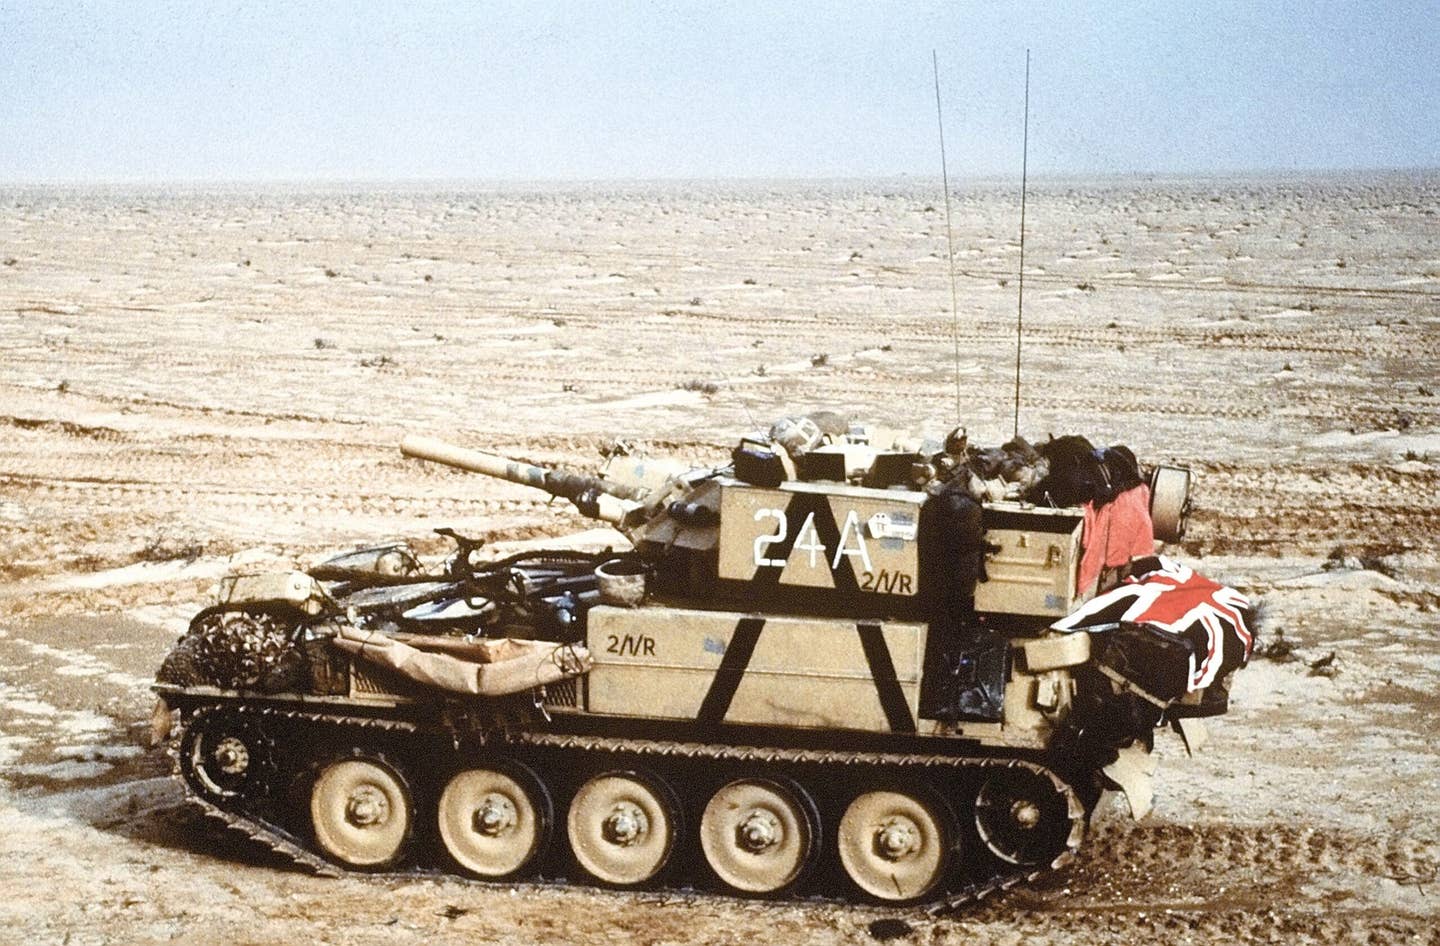 A Scorpion reconnaissance vehicle of the 7th Brigade Royal Scots, 1st United Kingdom Armored Division, advances east into Kuwait from southern Iraq during Operation Desert Storm. <em>Credit: PHC HOLMES/Wikimedia Commons</em>